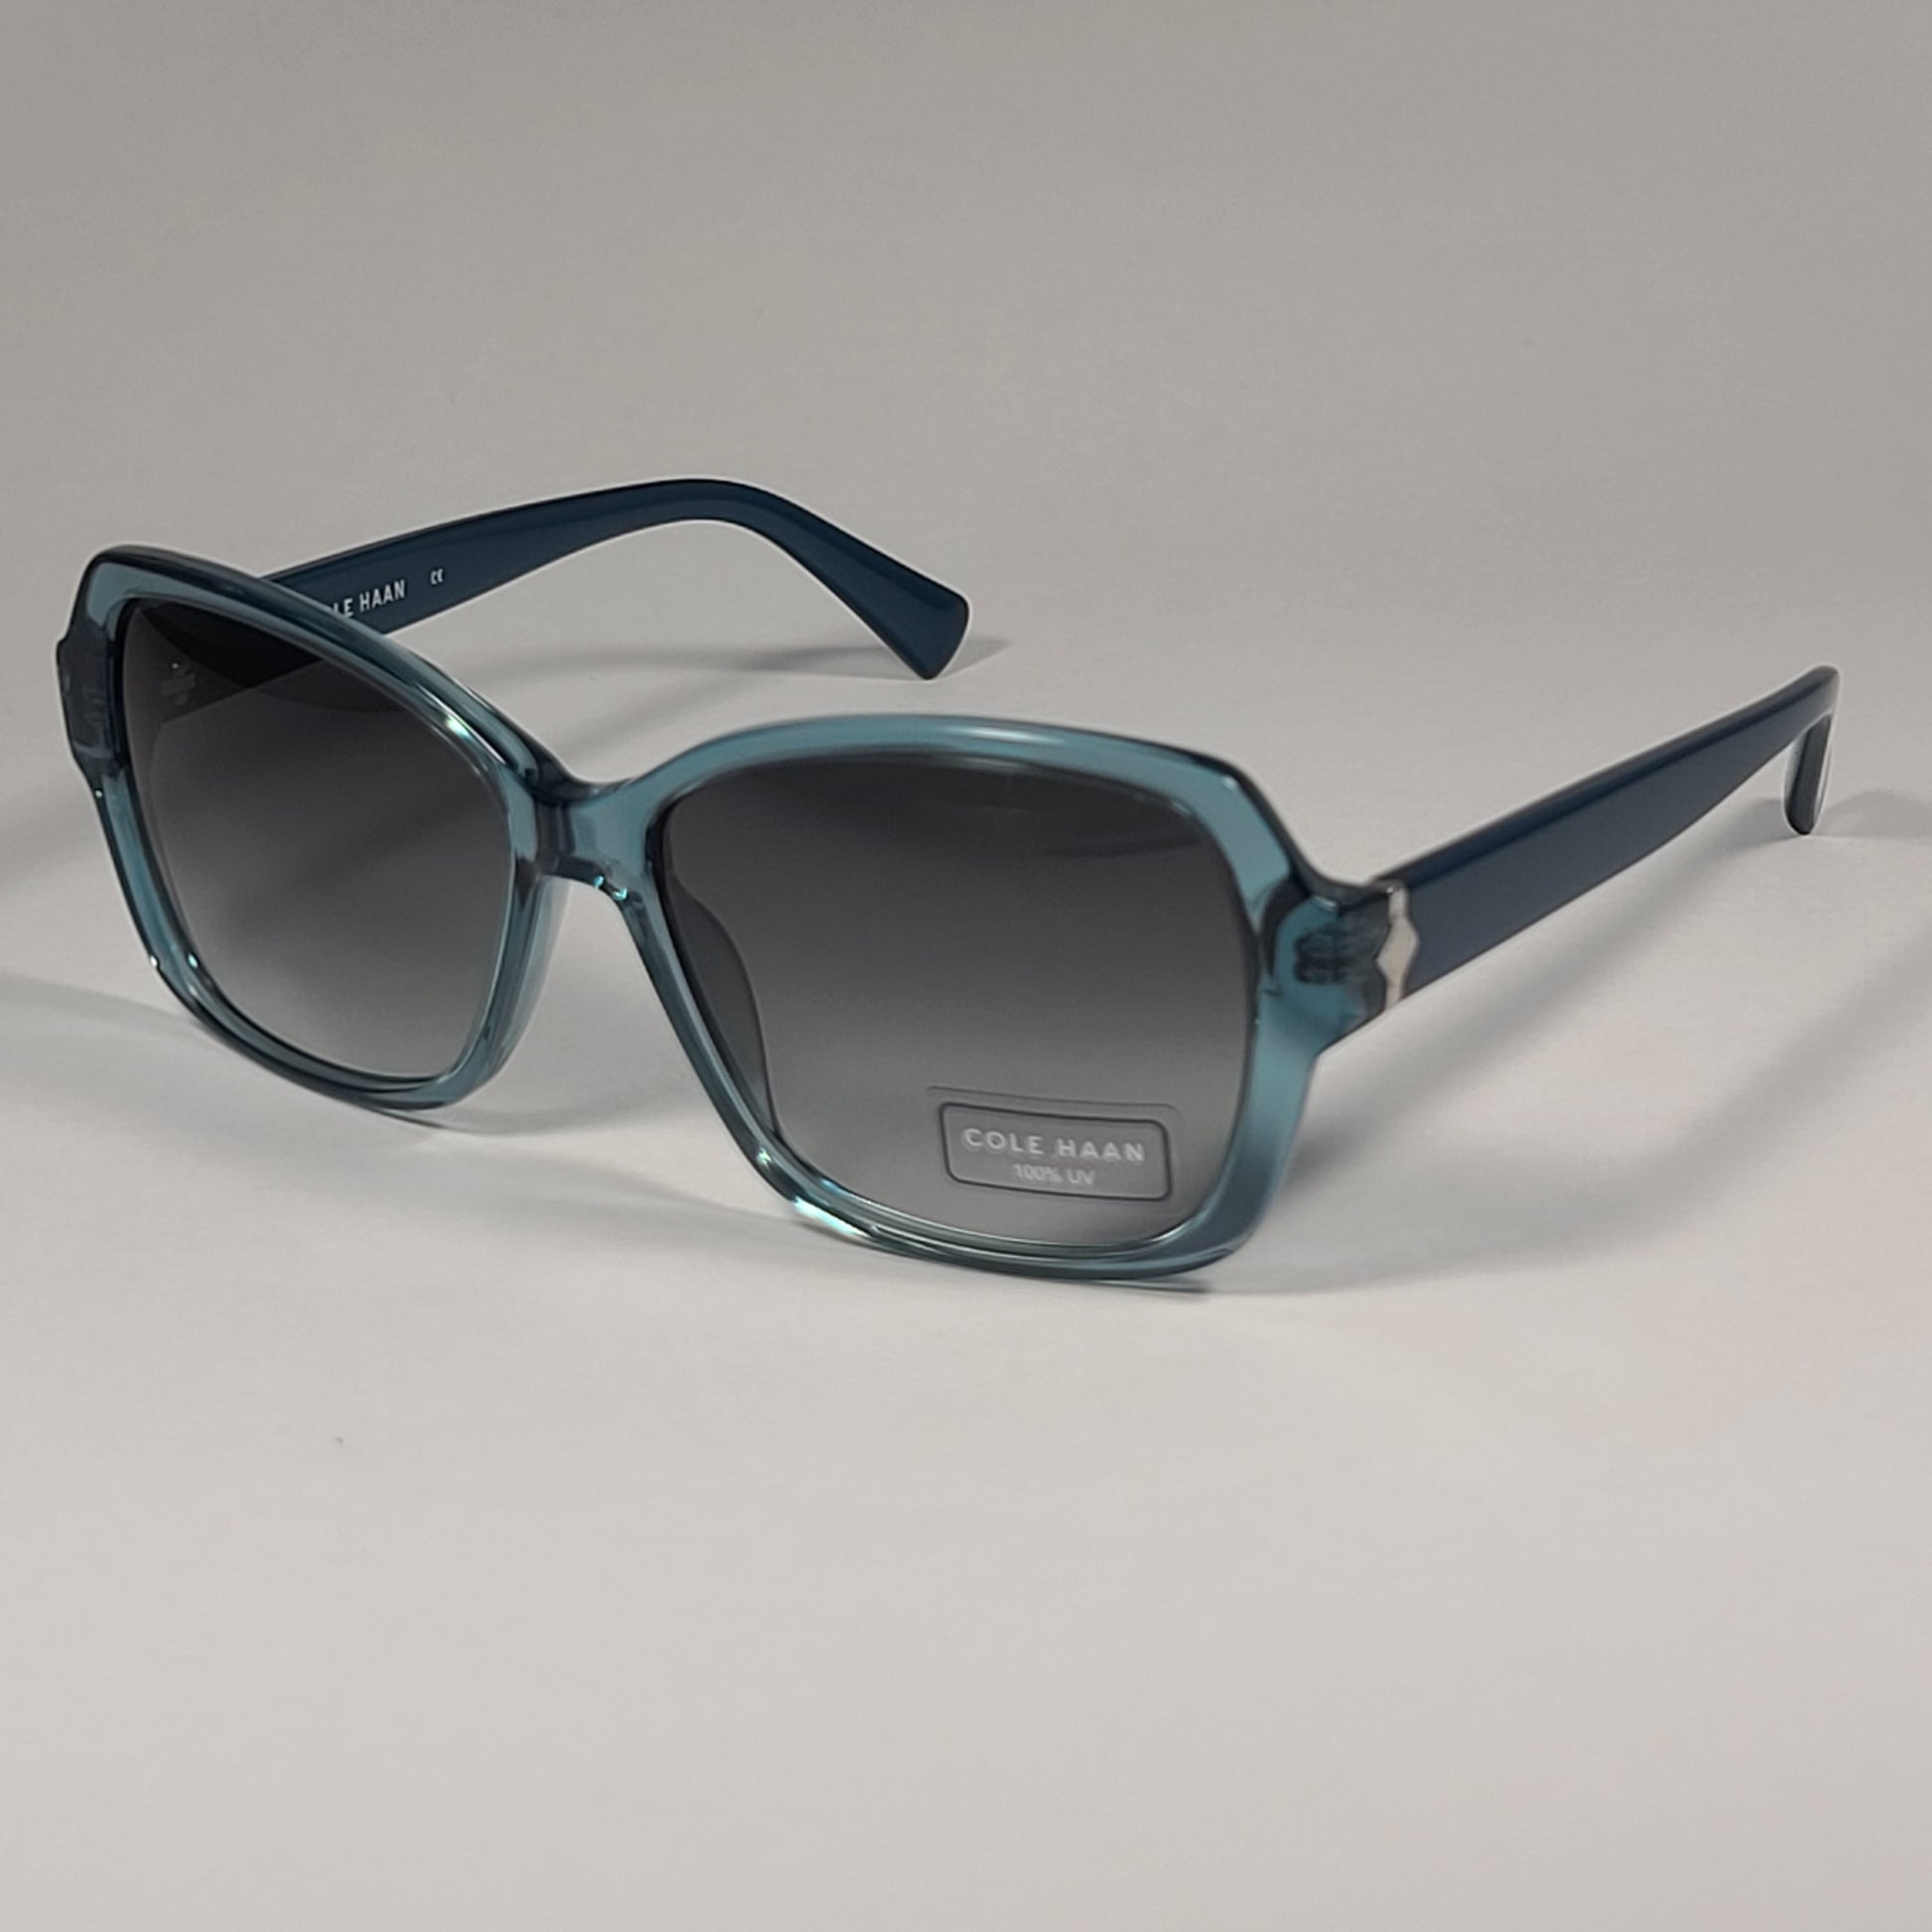 Cole Haan CH7007 320 Oval Sunglasses Crystal Teal Frame Gray Gradient Lens - Sunglasses